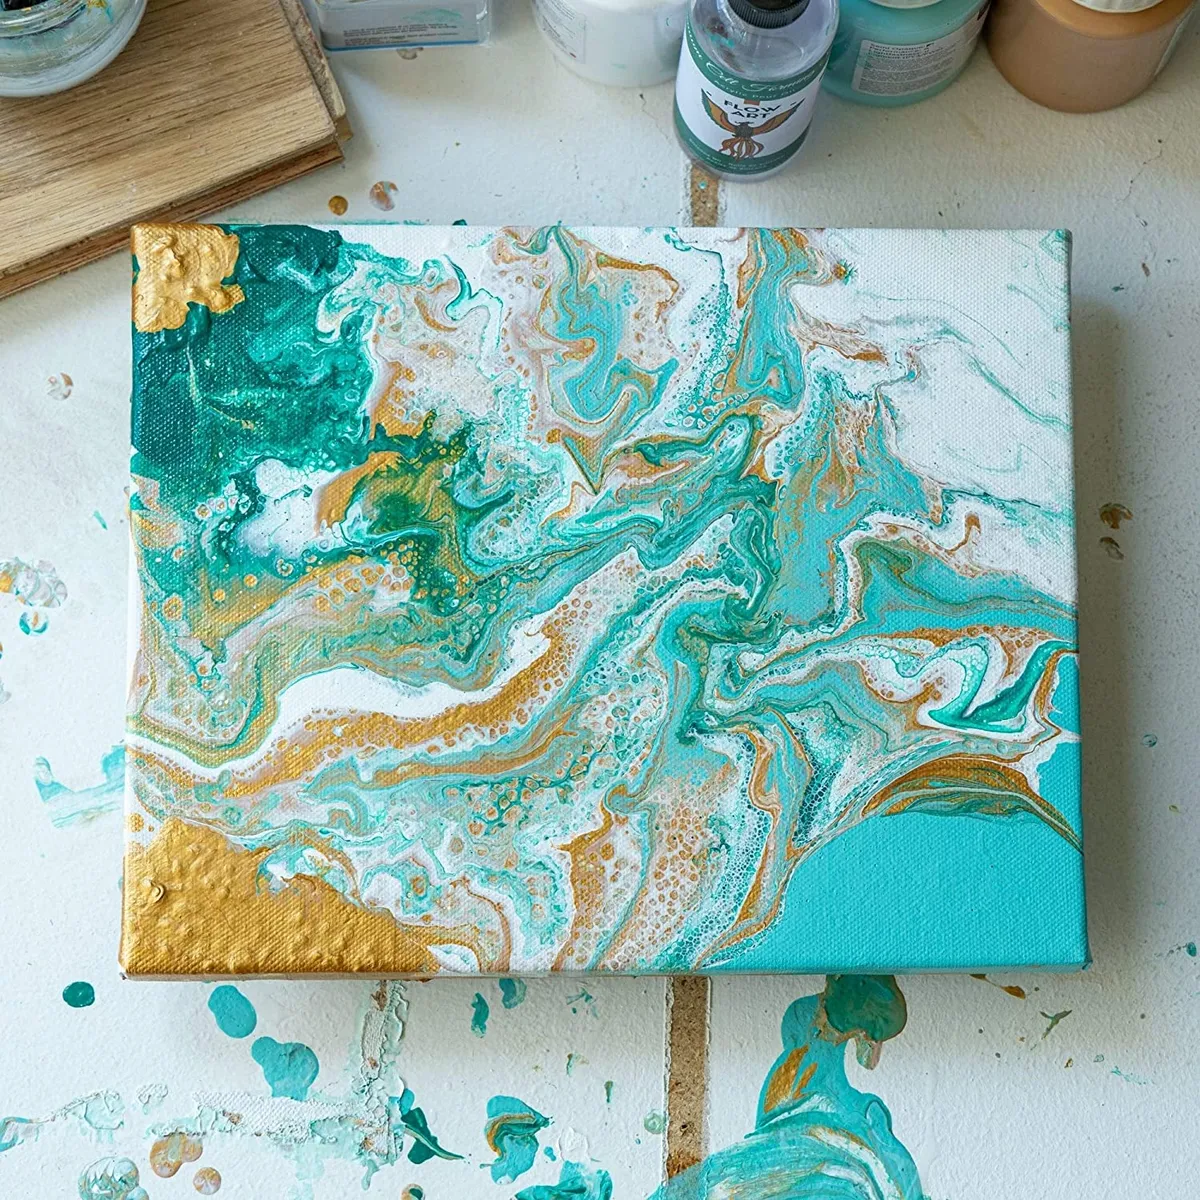 Acrylic Paint Pouring Techniques Step by Step Beginners Guide